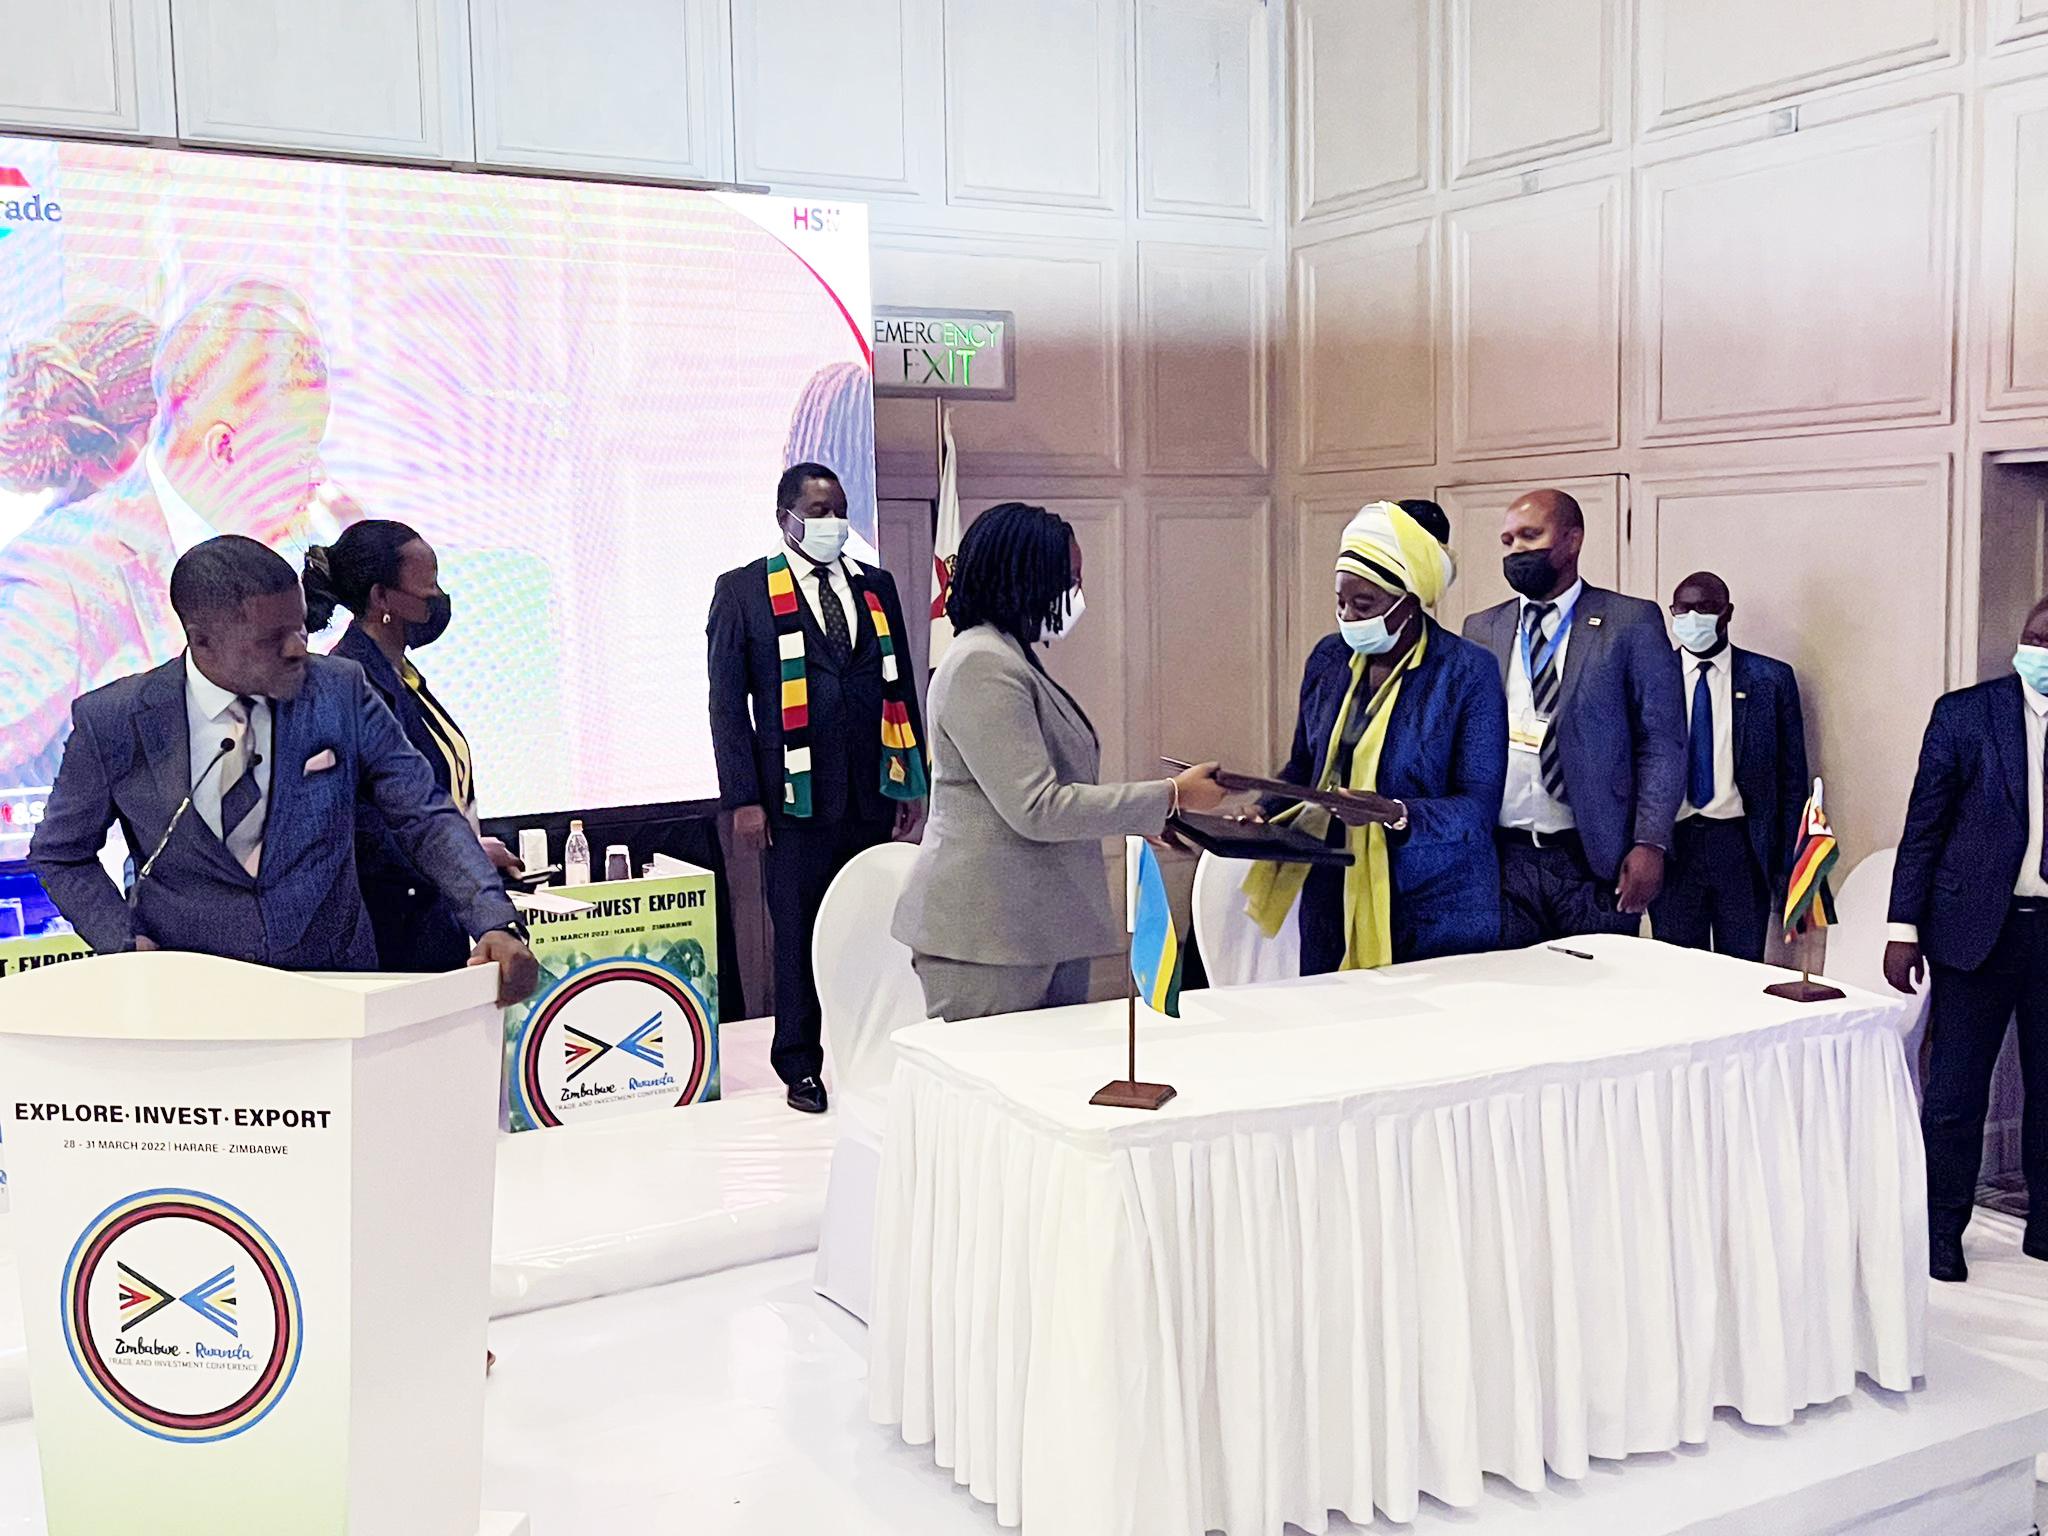 Minister of Trade and Industry Beatha Habyarimana and Zimbabwe's minister exchange documents after signing the agreement .